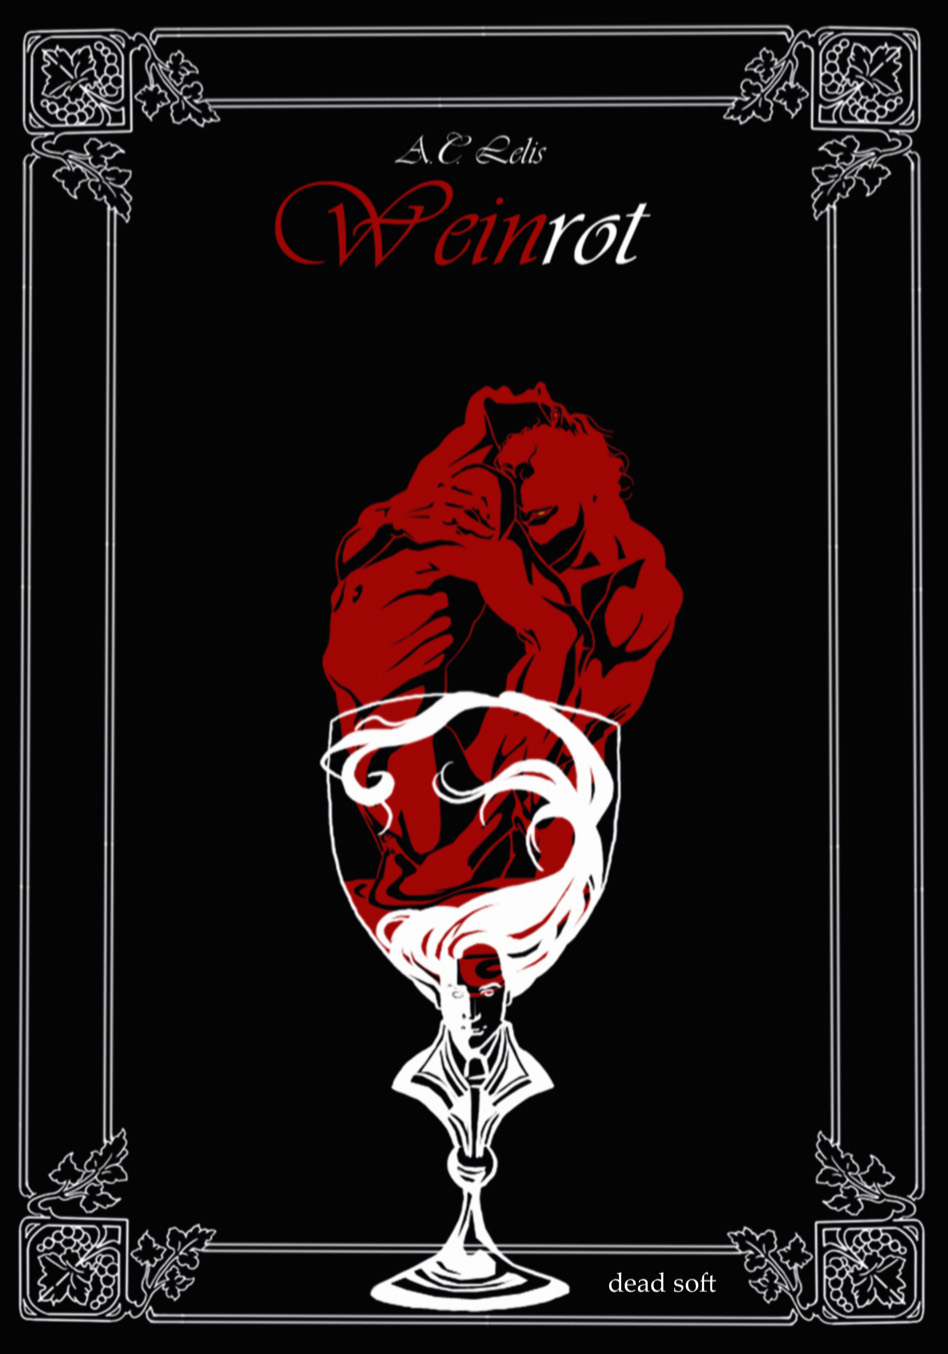 Cover: Weinrot